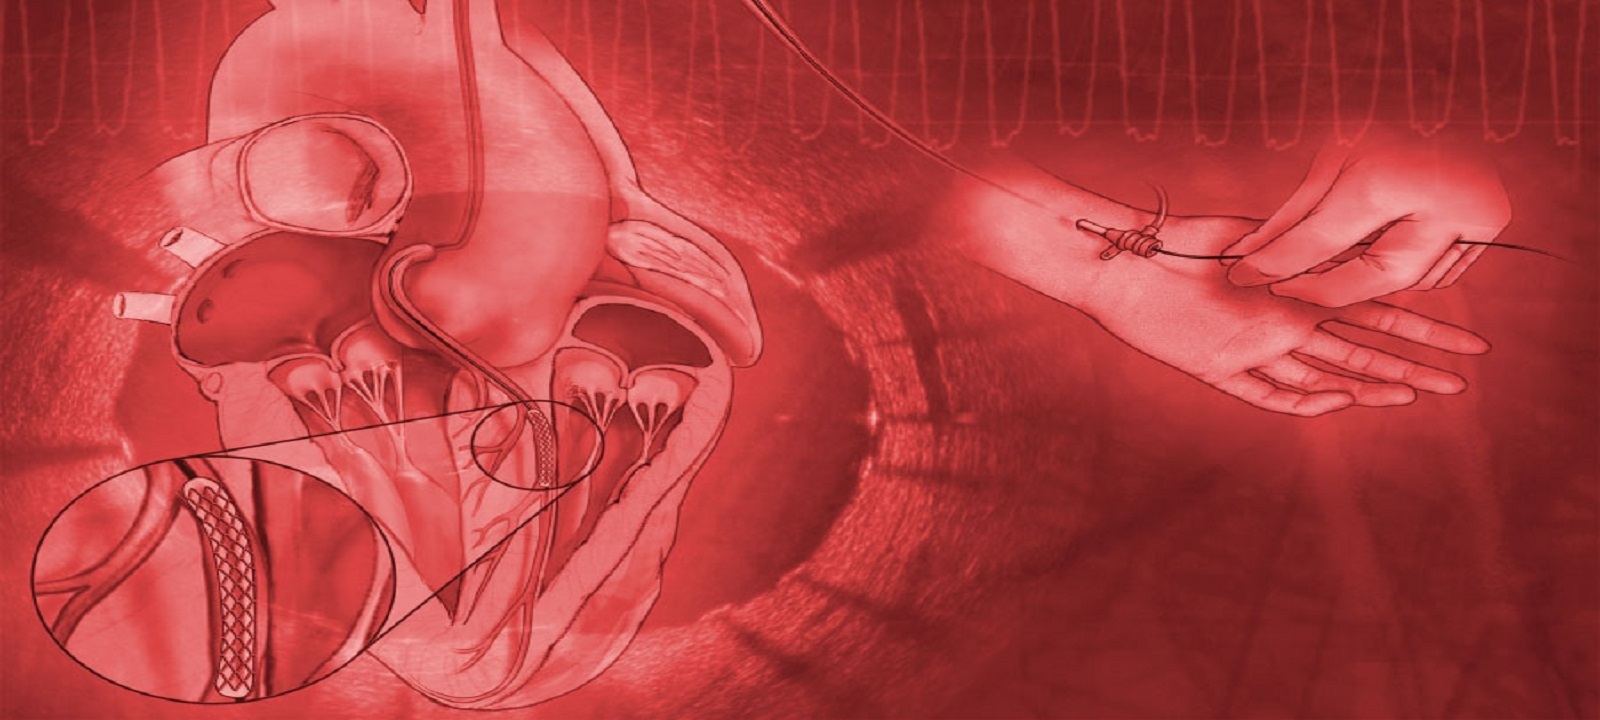 Interventional Cardiology Review Course for Boards and Recertification- Livestream CME